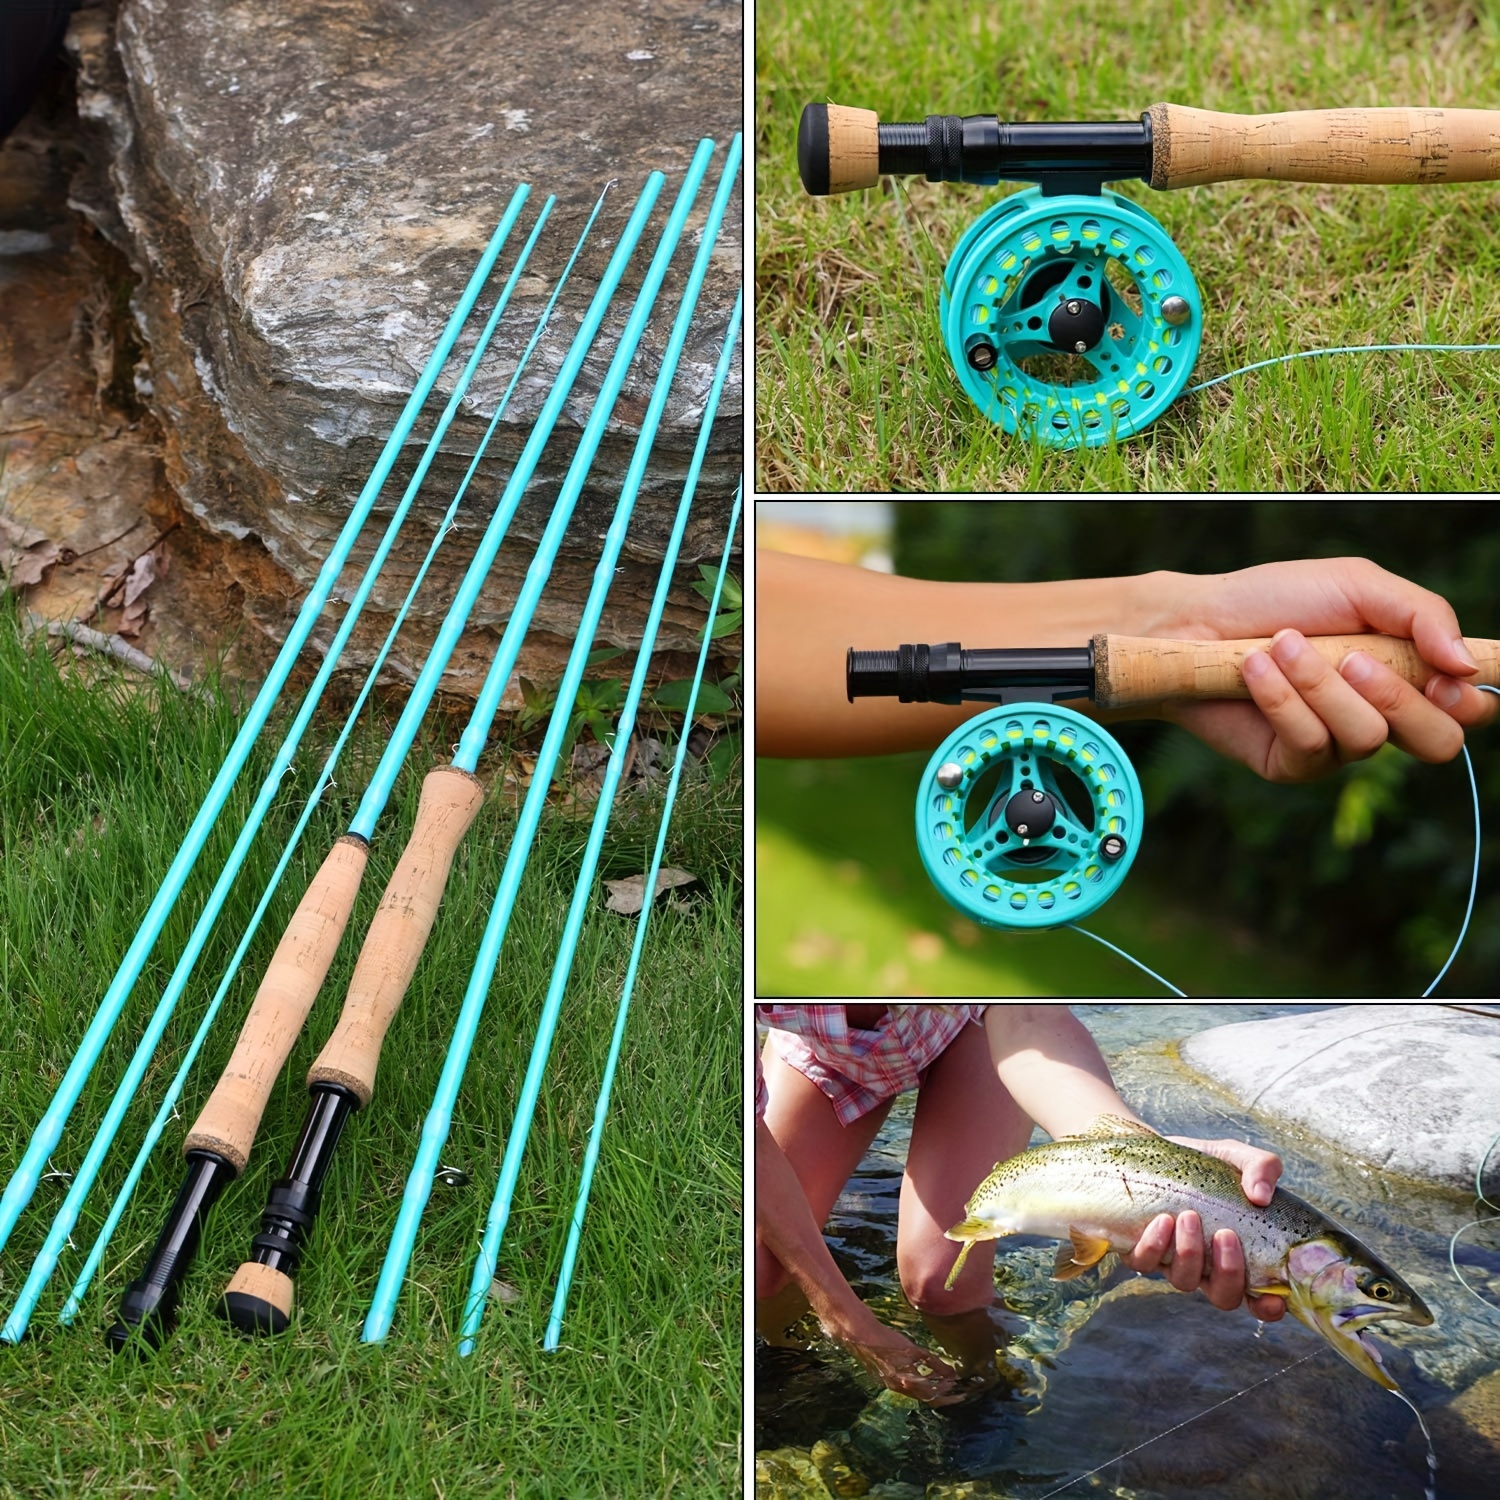 Sougyilang 4 Sections Fly Rod High Carbon Cloth Rod Embryo - Temu